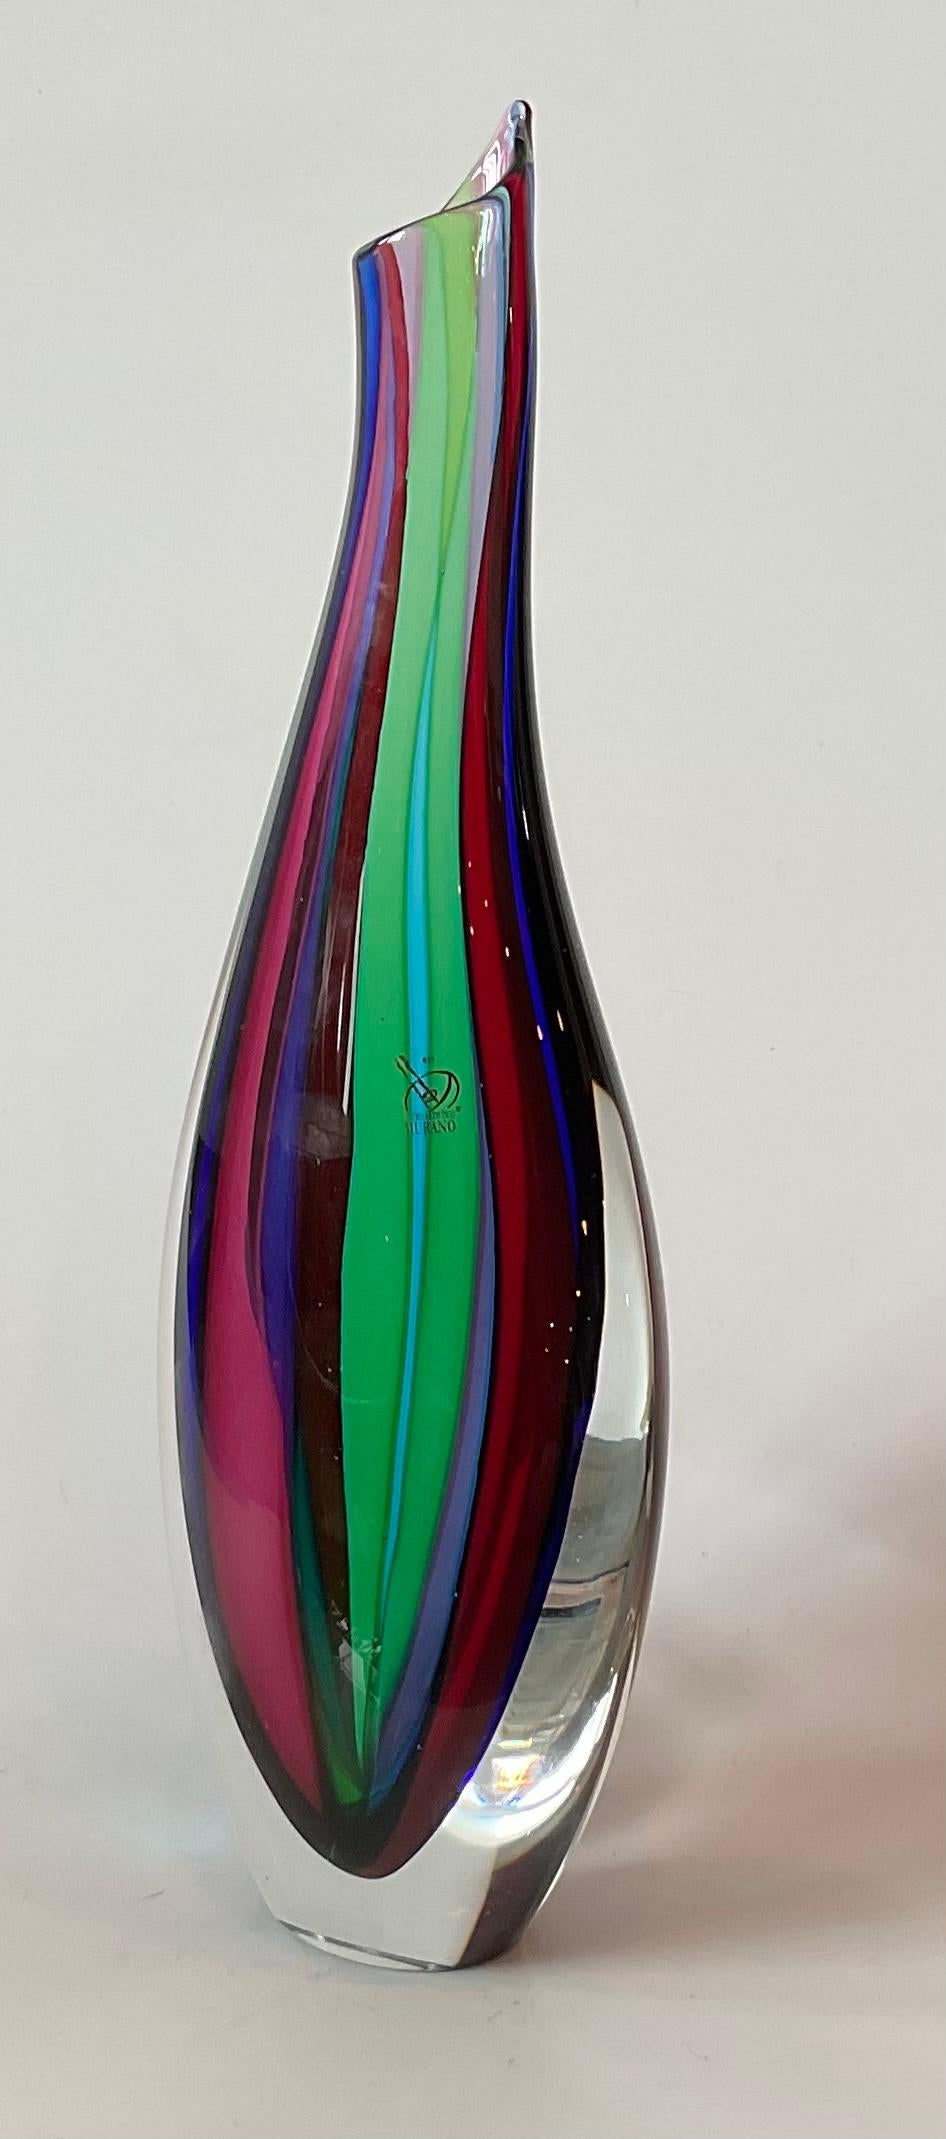 Mid-Century Modern Giuliani Mian Murano Art Glass Vase Striped Multi Color Signed by the Artist For Sale